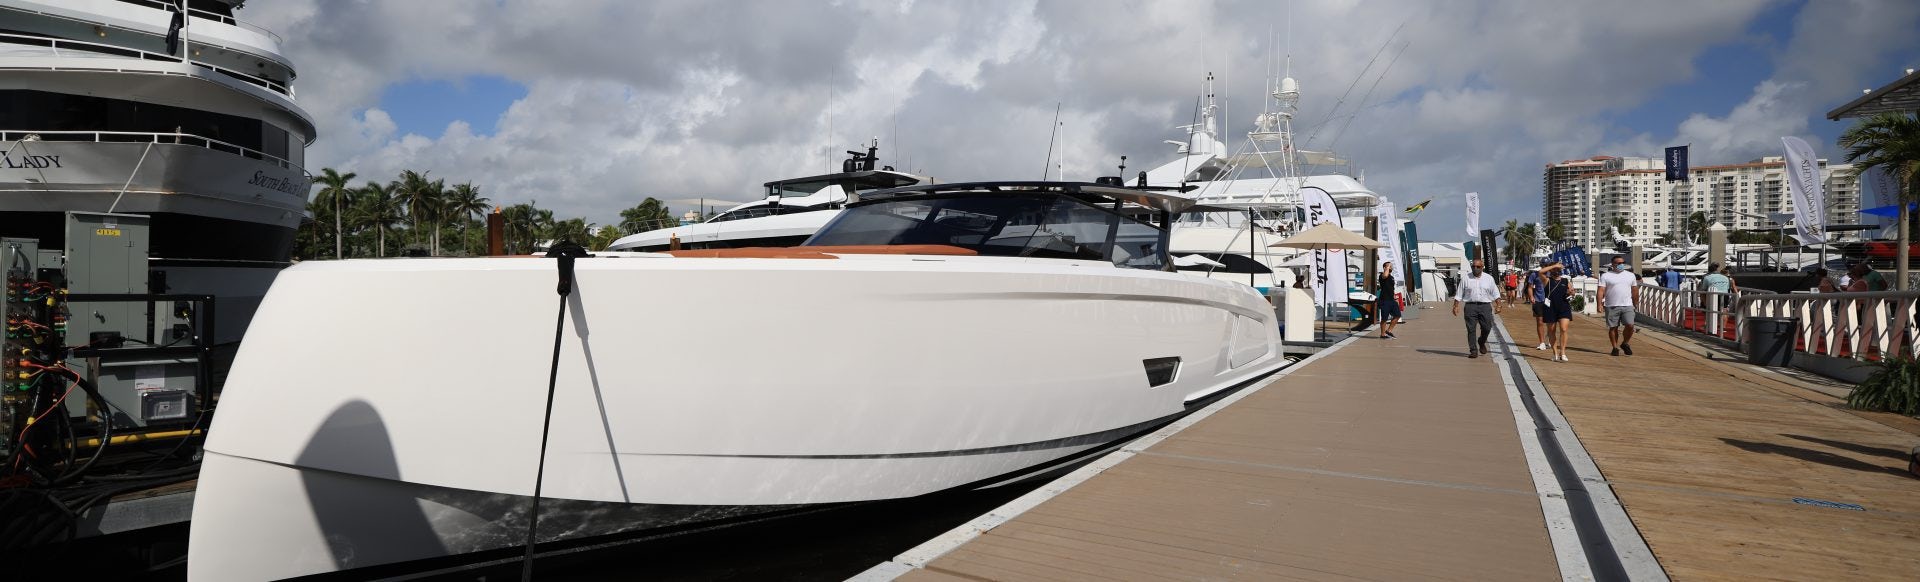 Show time: Five days of sales at FLIBS 2020